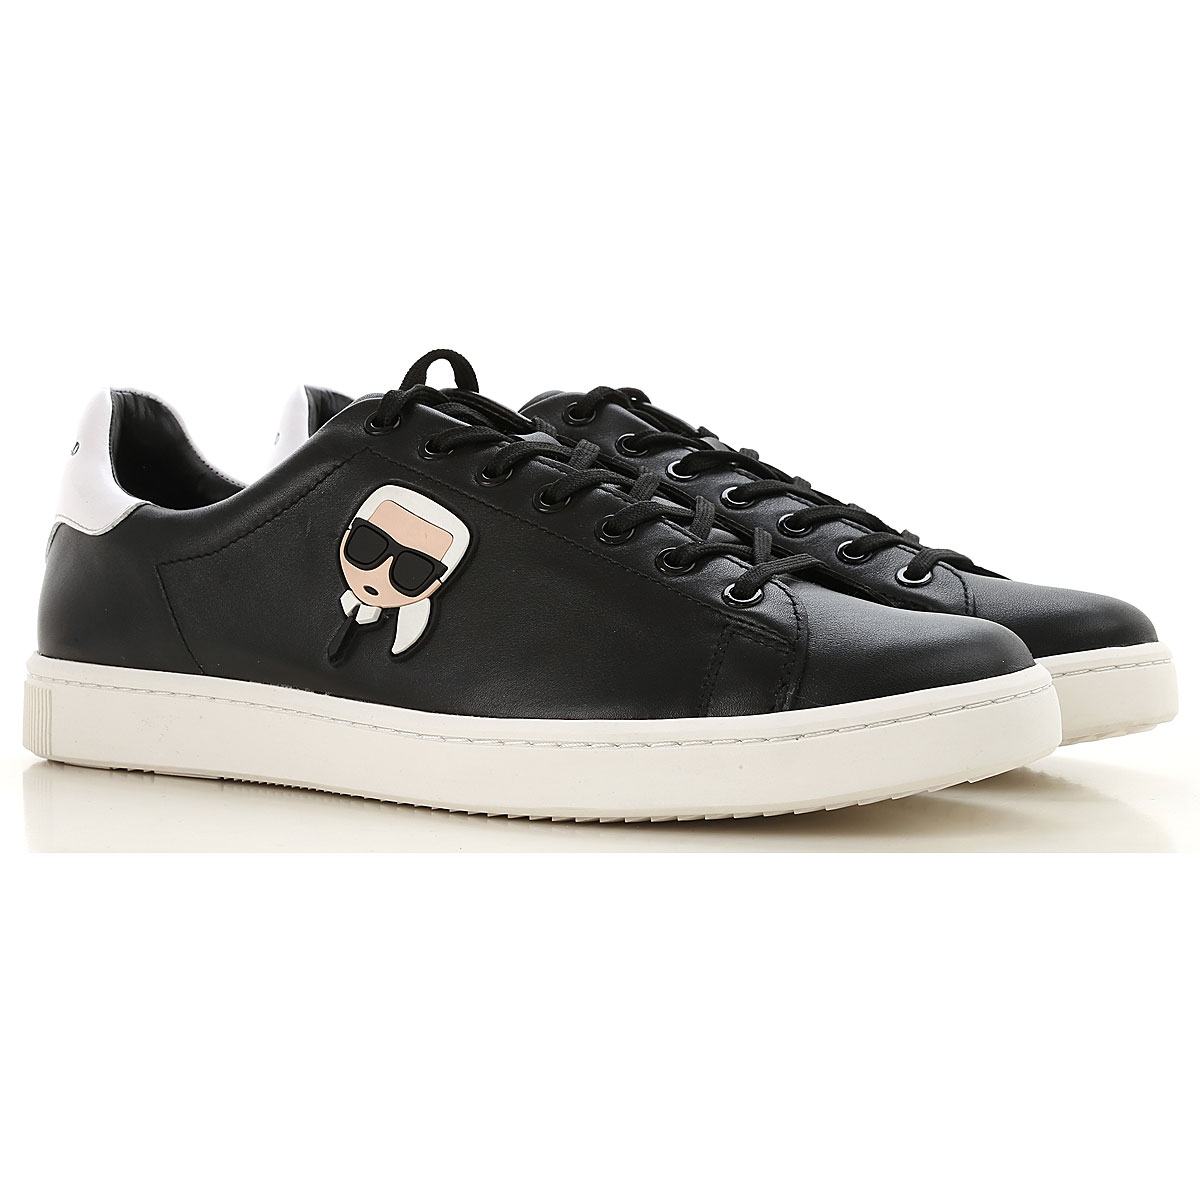 Mens Shoes Karl Lagerfeld, Style code: 855013-582479-990